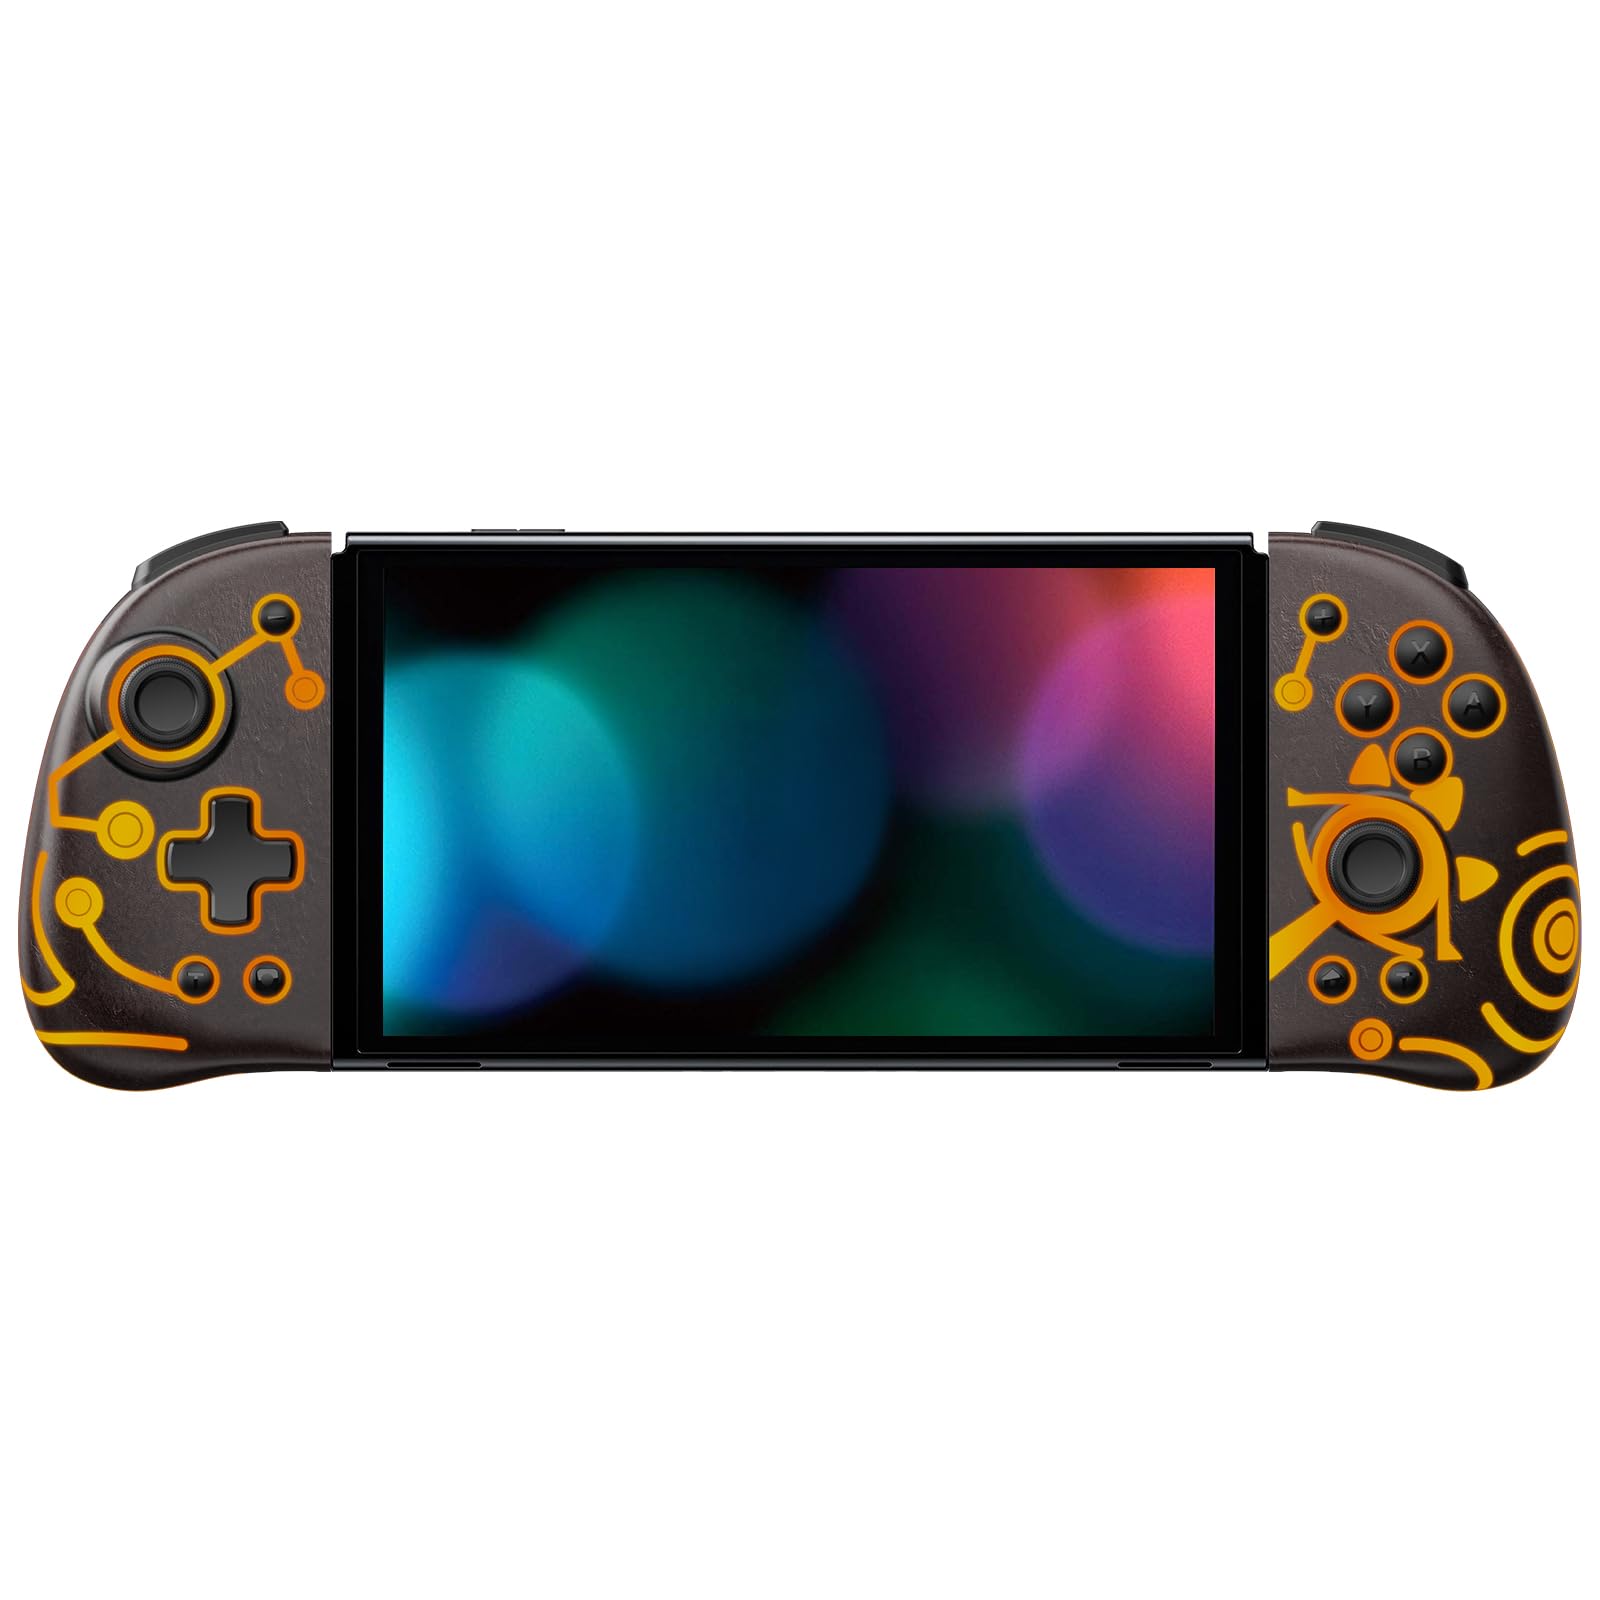 FUNLAB Luminous Switch Controller Compatible with Nintendo Switch/OLED, Ergonomic Joypad Controller for Handheld Mode with 7 LED Colors/Paddle/Turbo for Zelda Fans - Zonaite Brown